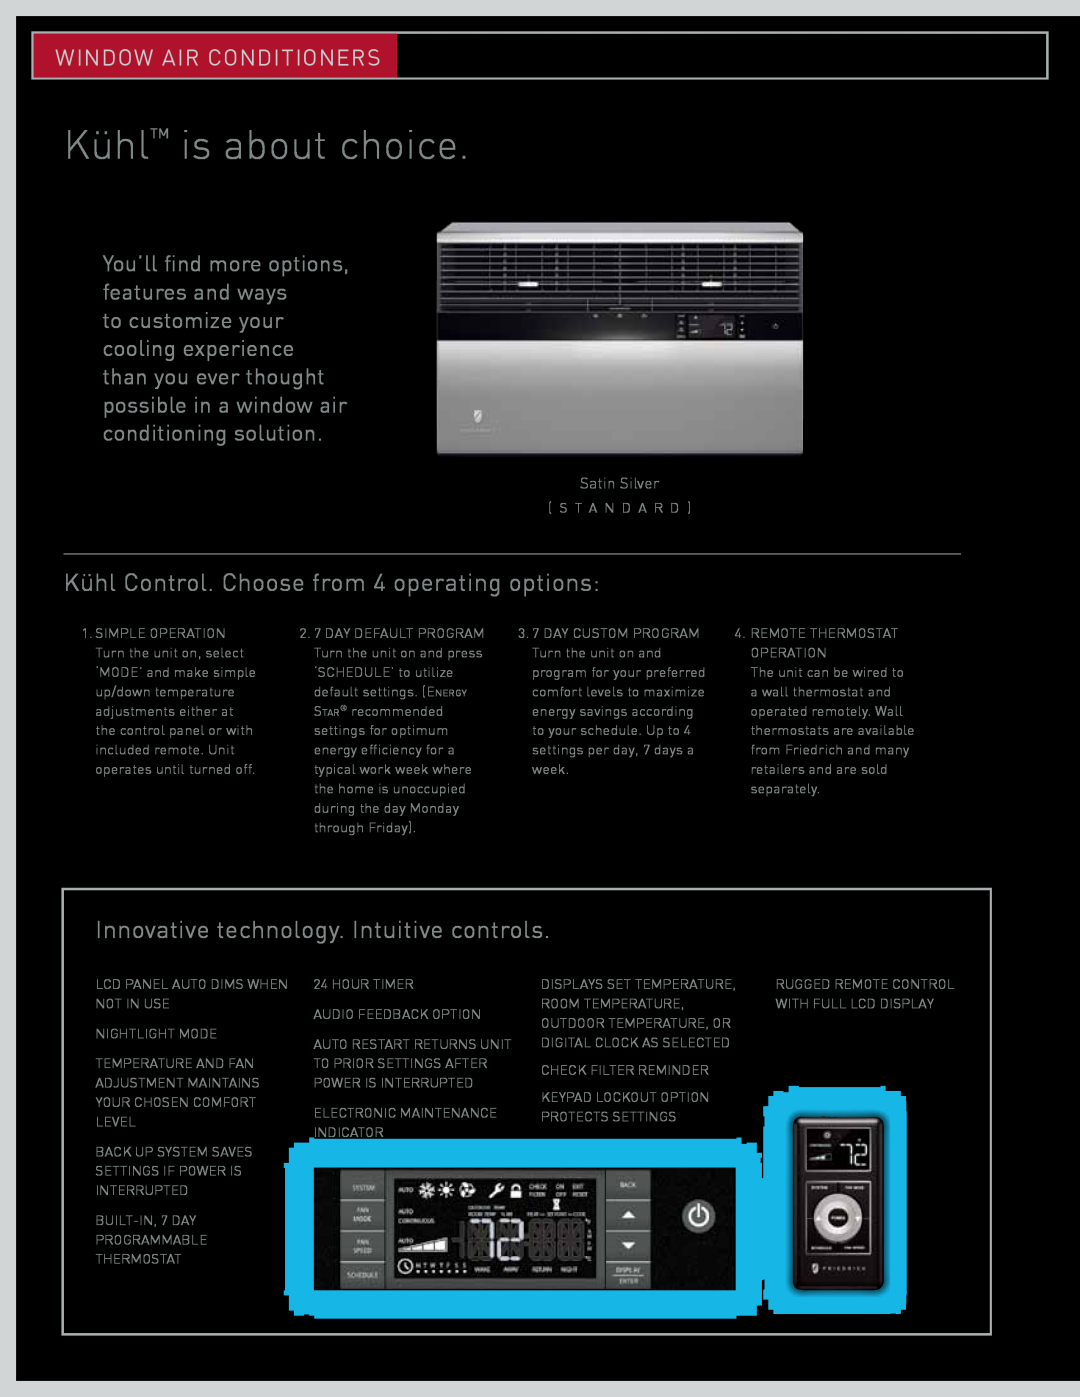 Friedrich Room Air Conditioners Kühl Control. Choose from 4 operating options, Innovative technology. Intuitive controls 